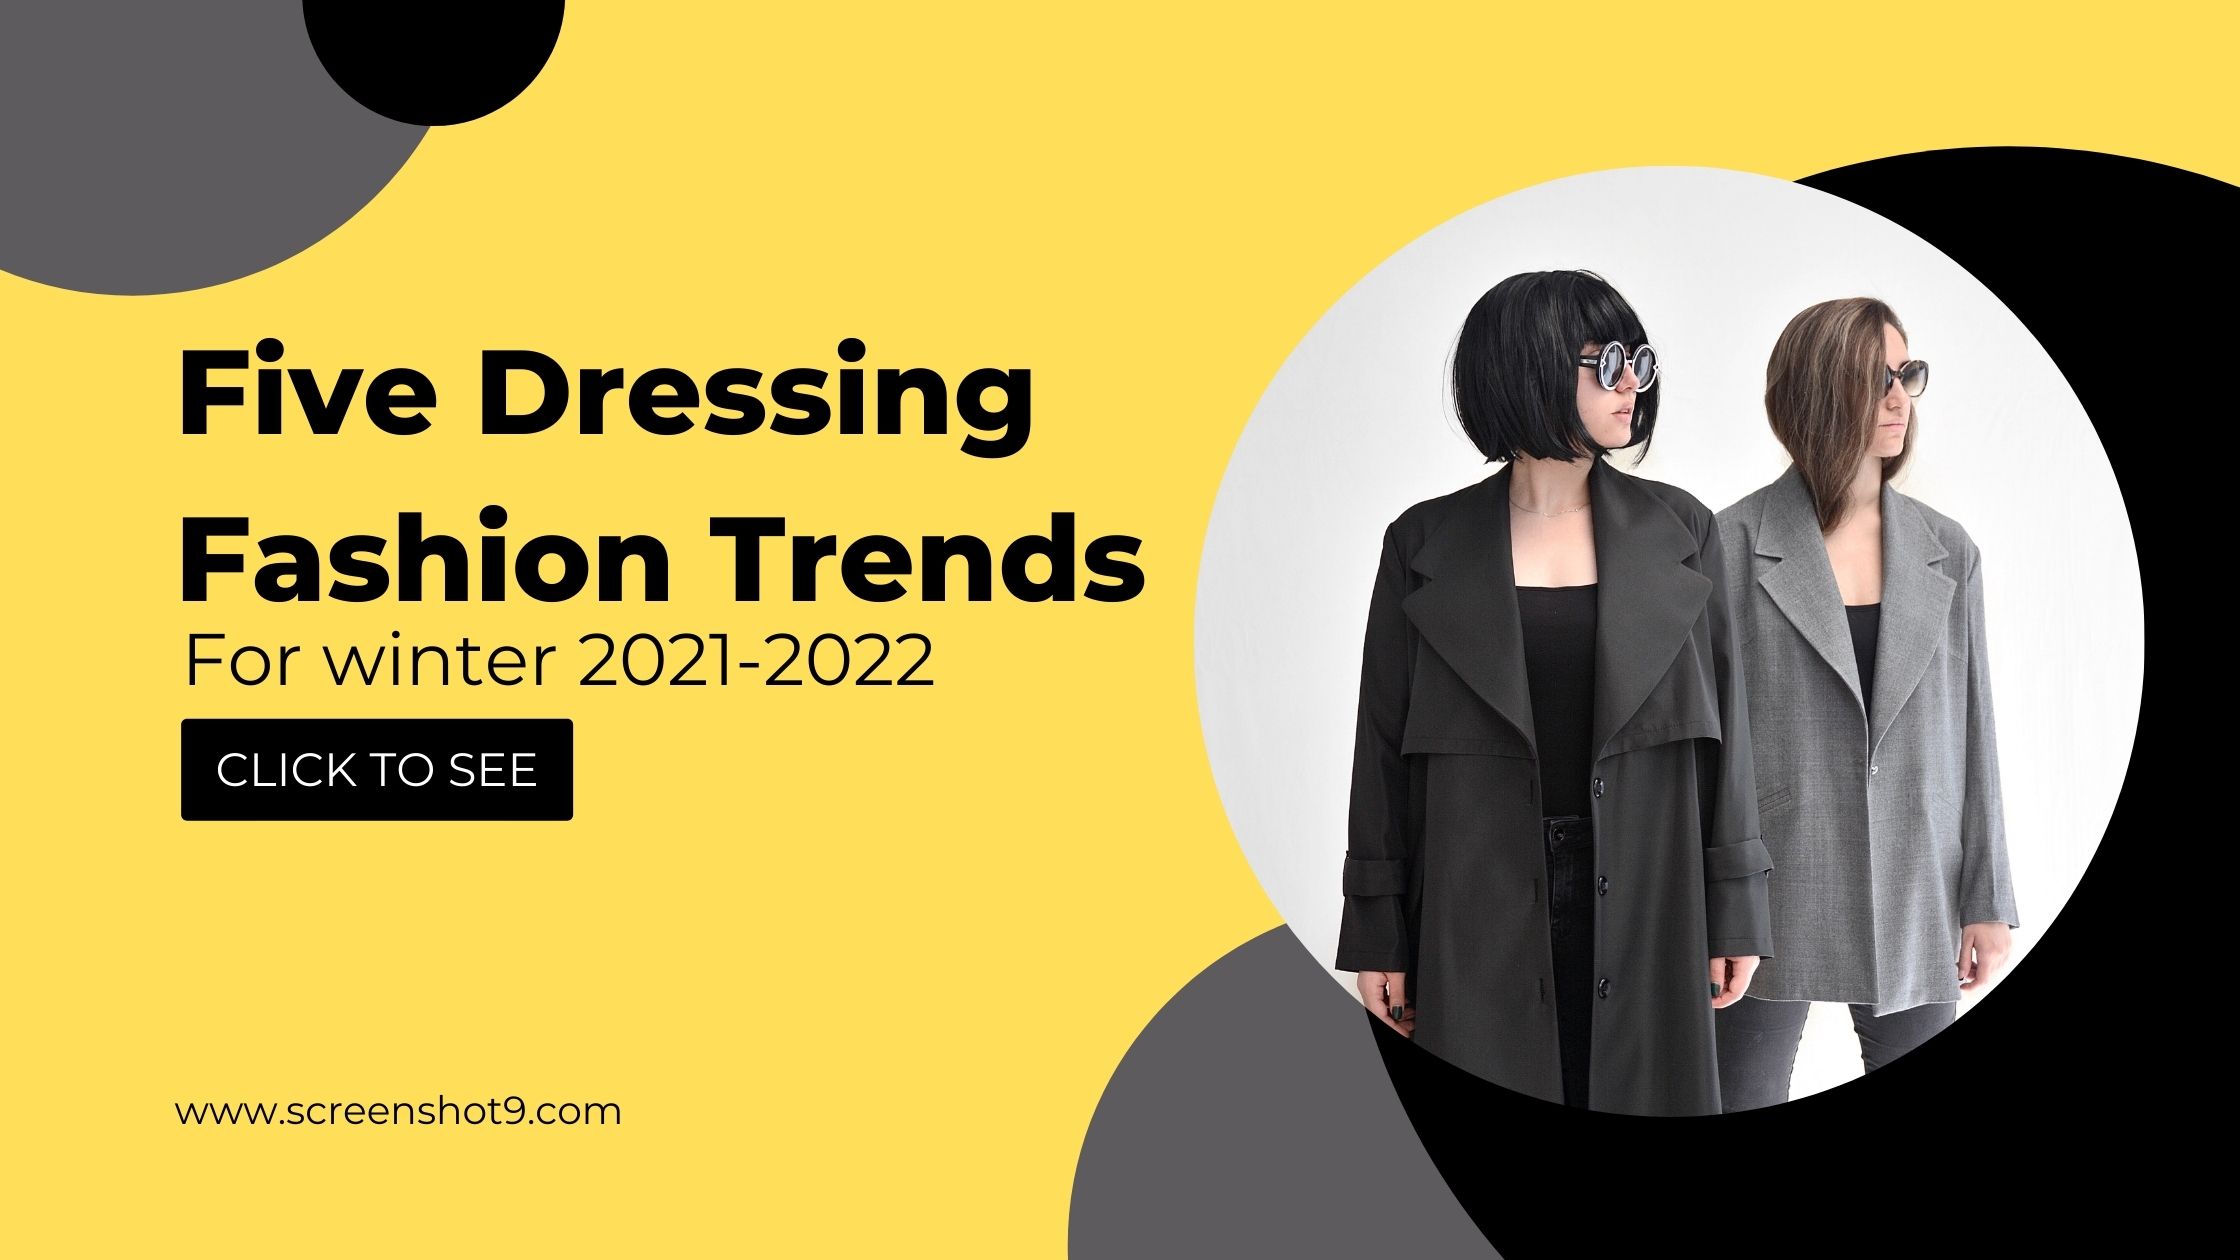 Five Dressing Fashion Trends for winter 2021-2022